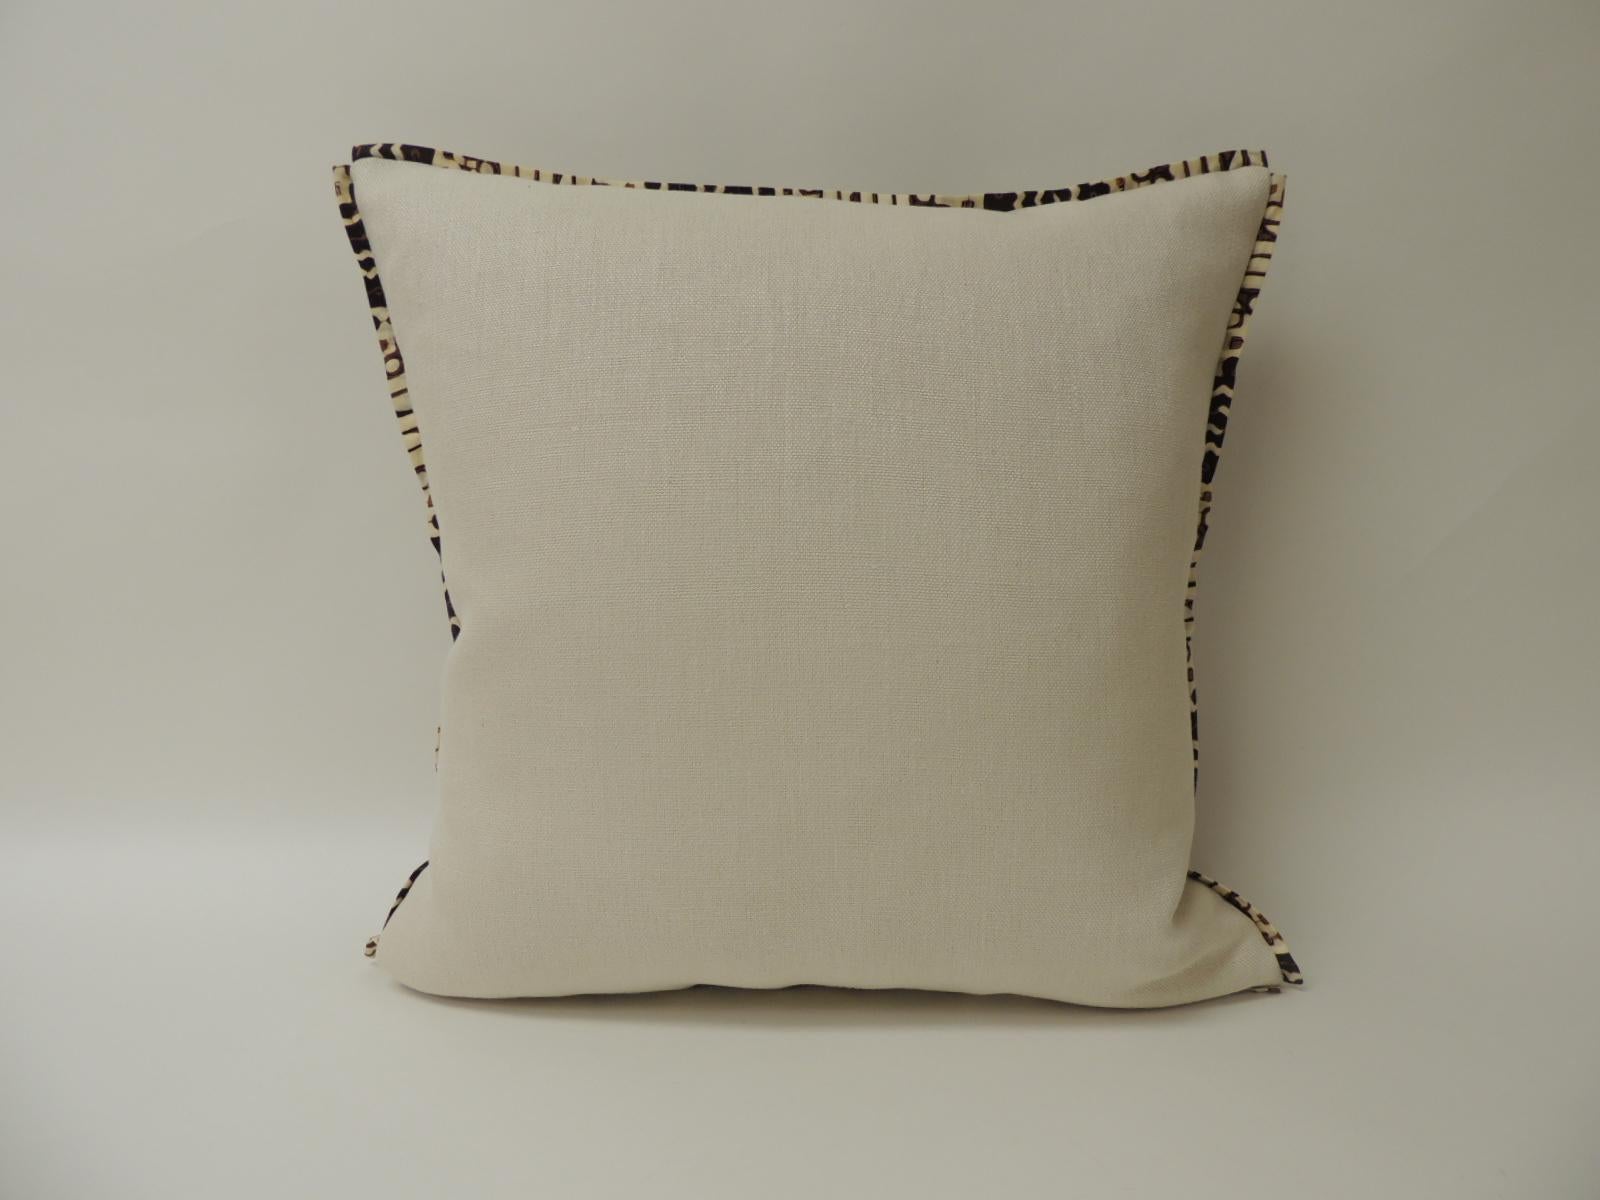 Hand-Crafted Vintage Brown and Black Batik Decorative Square Pillow